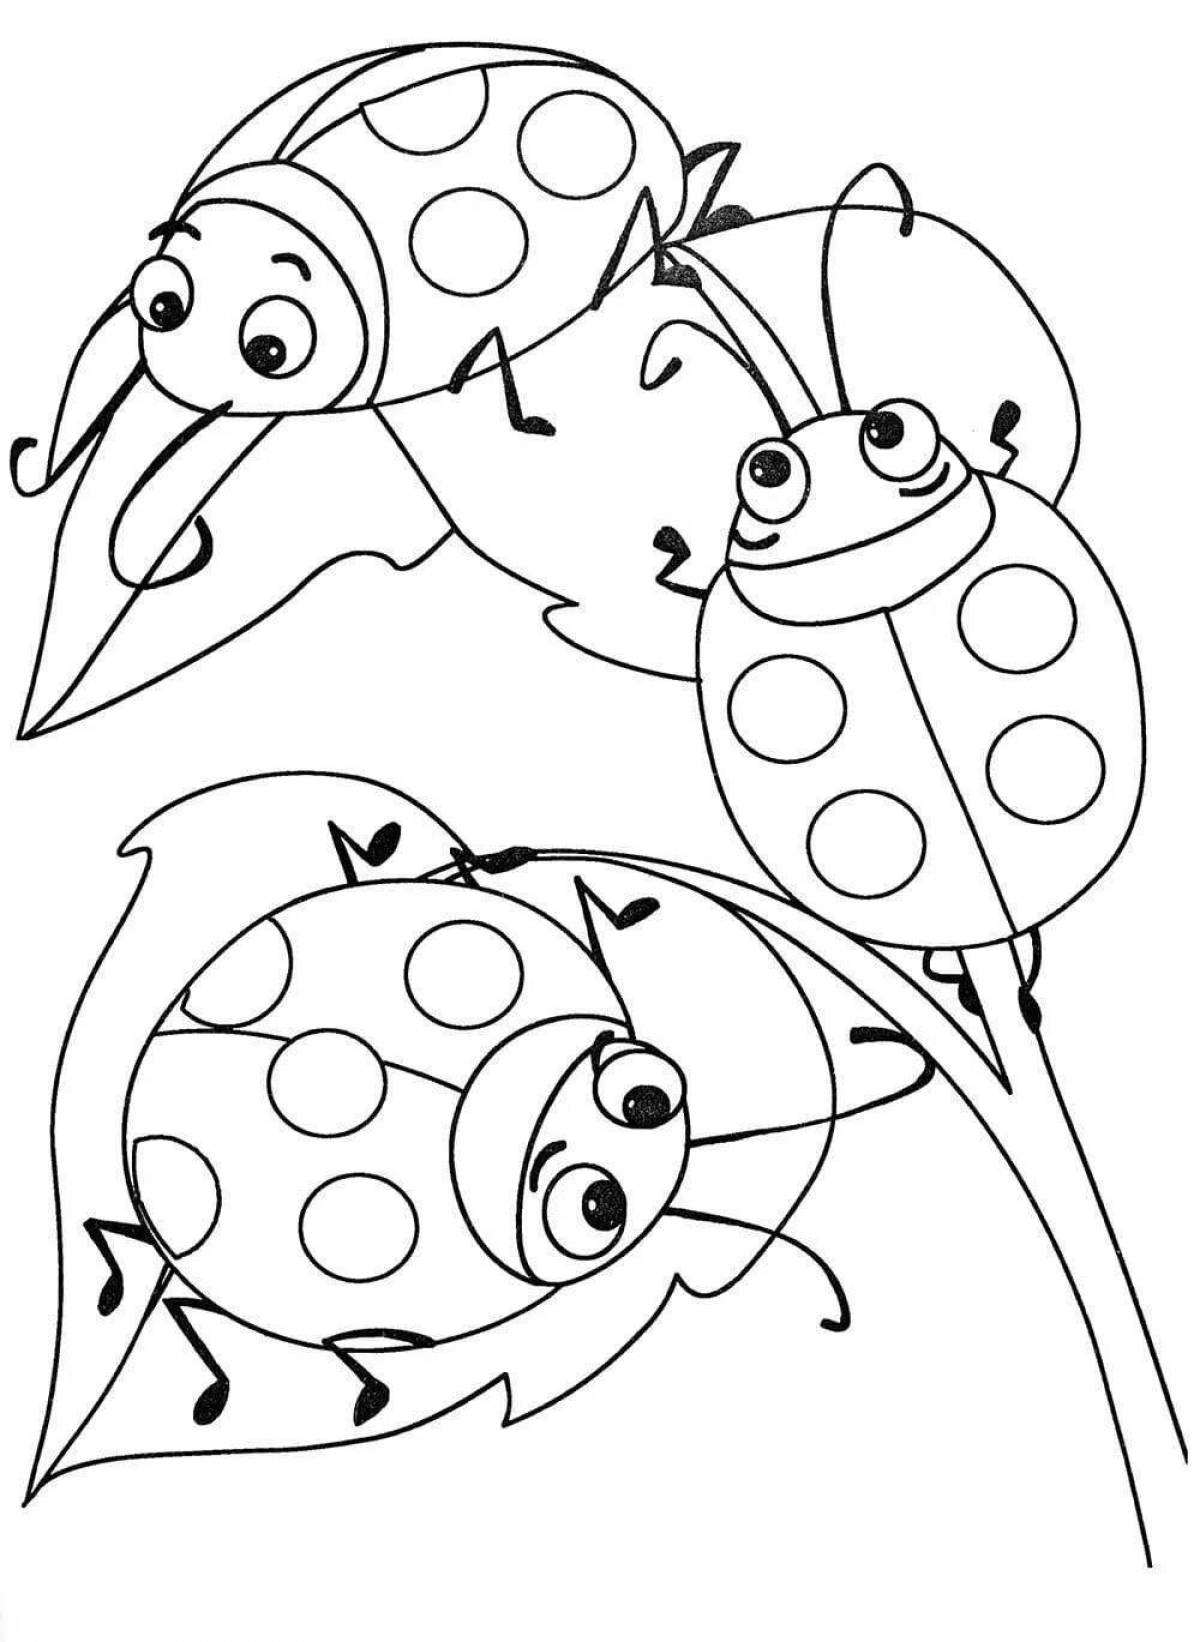 Coloring page spectacular ladybug